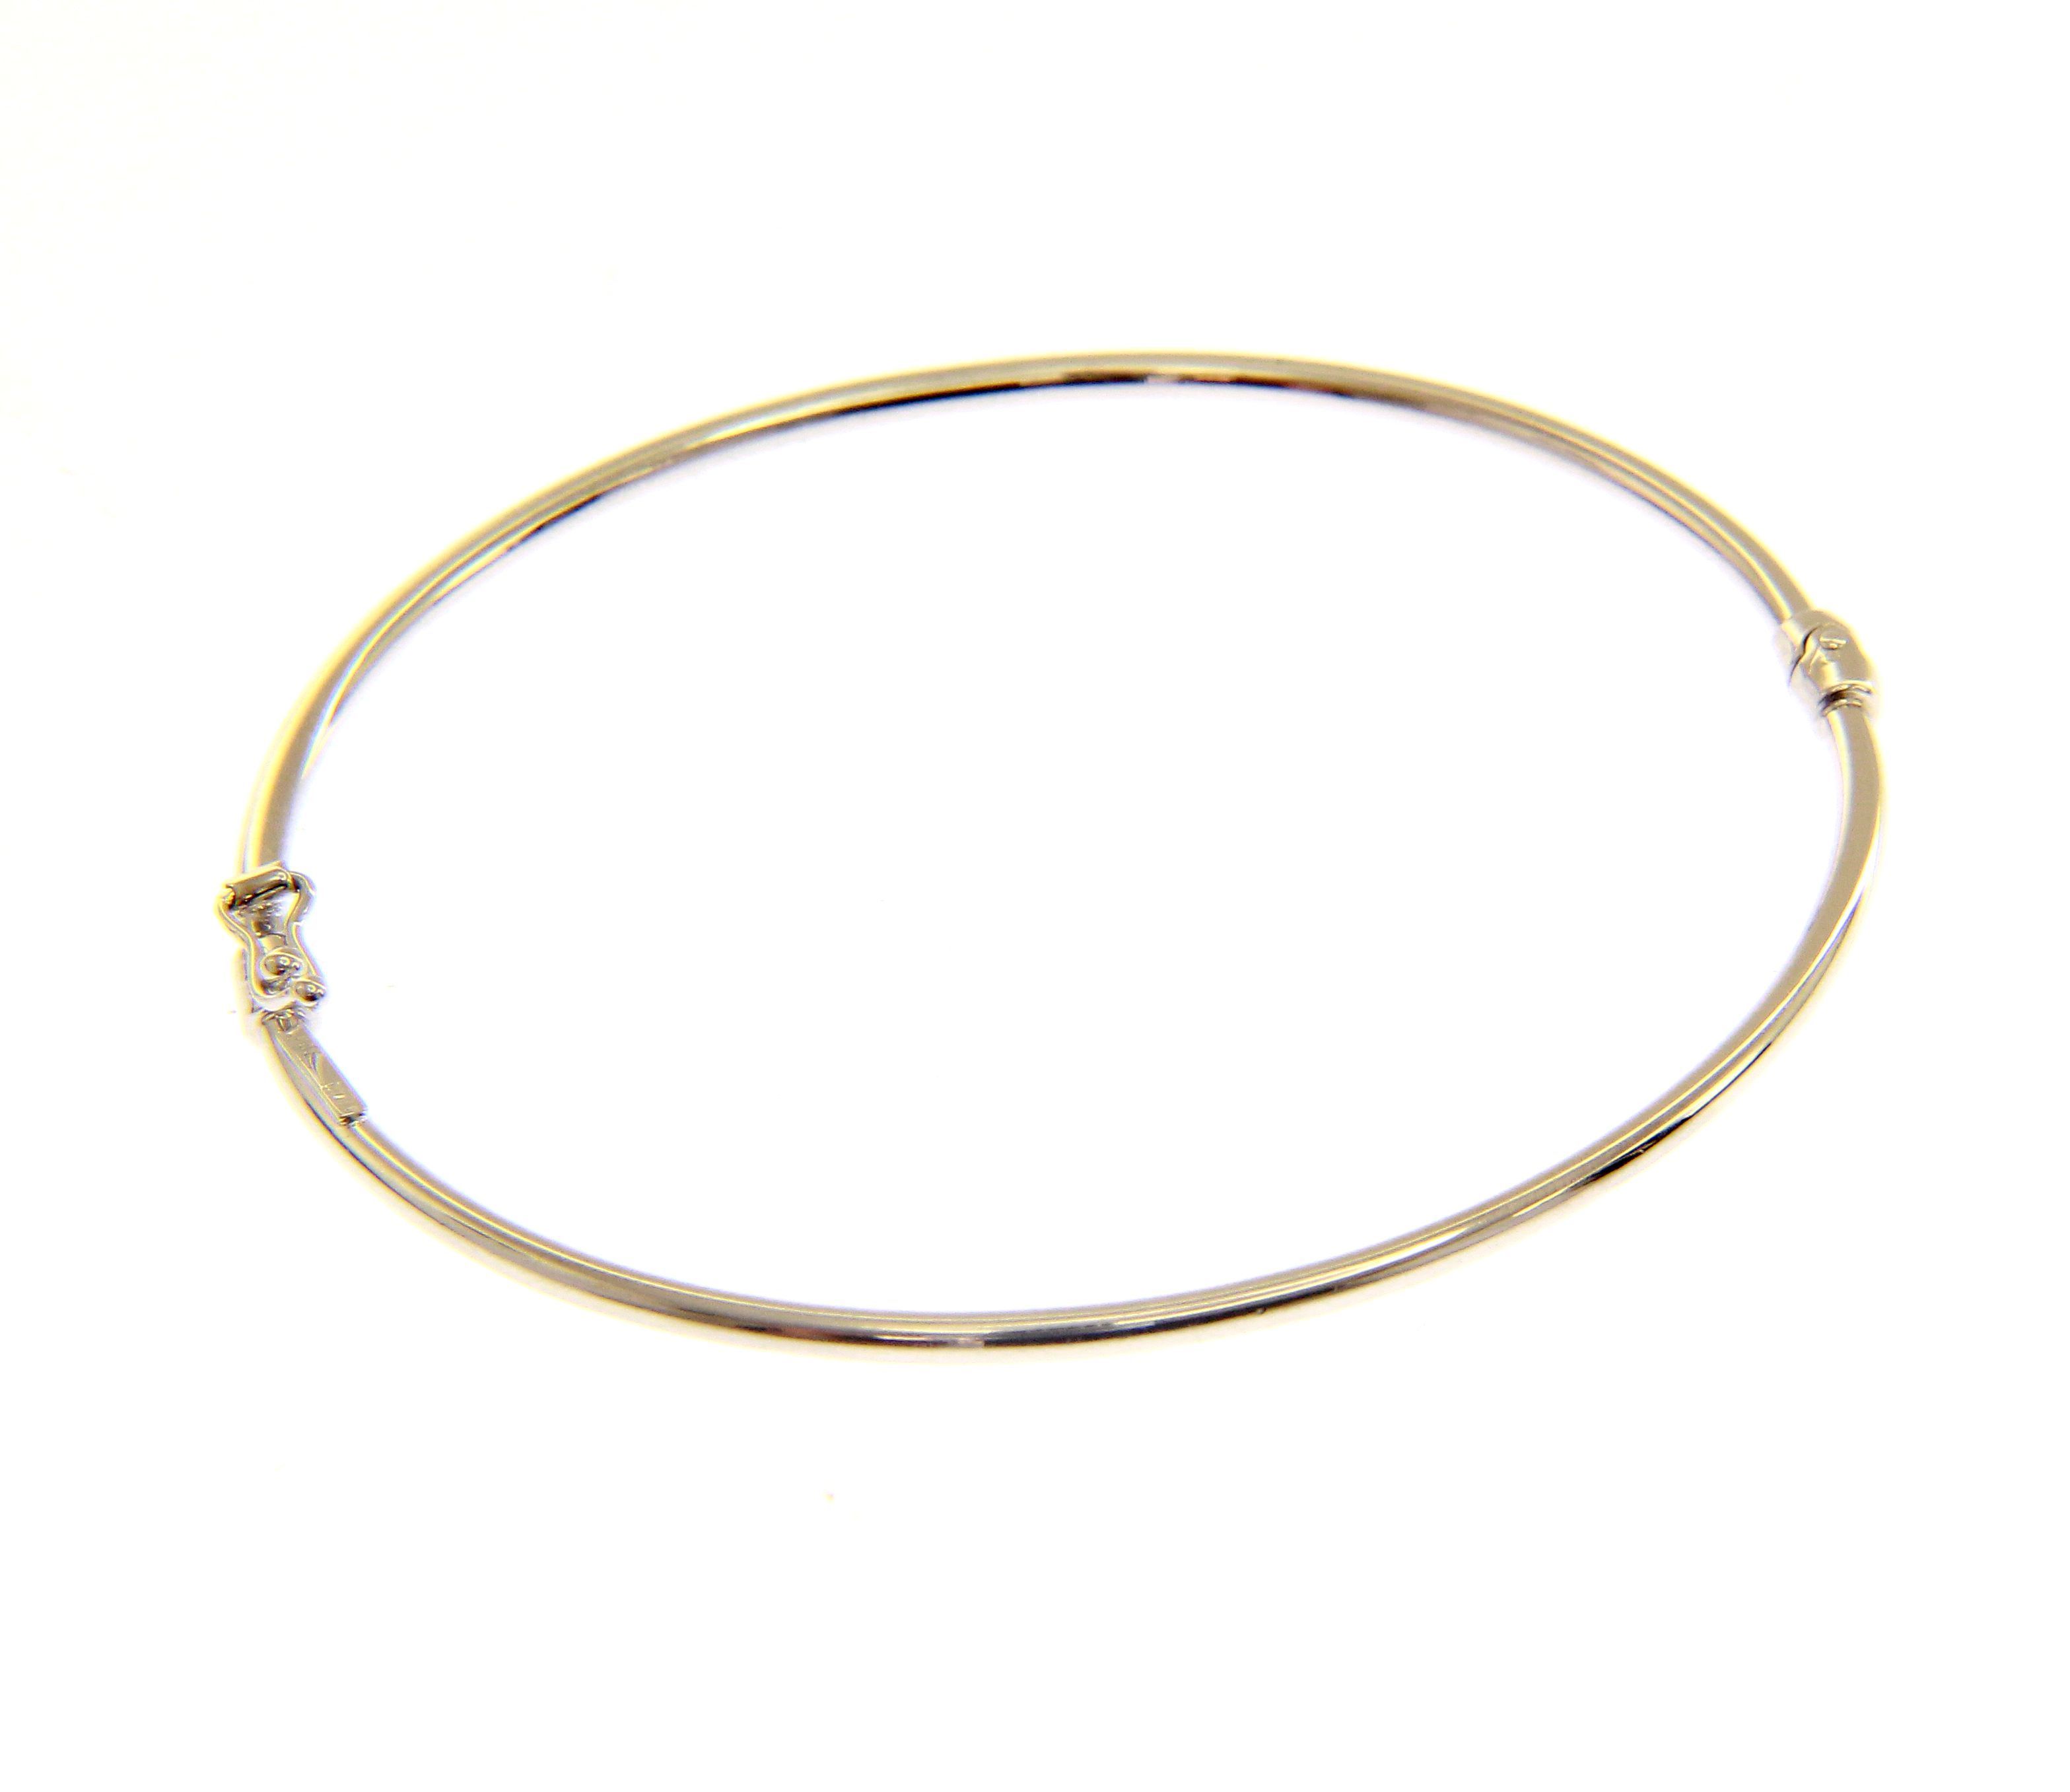 White gold oval bracelet with clasp k14(code S205132)